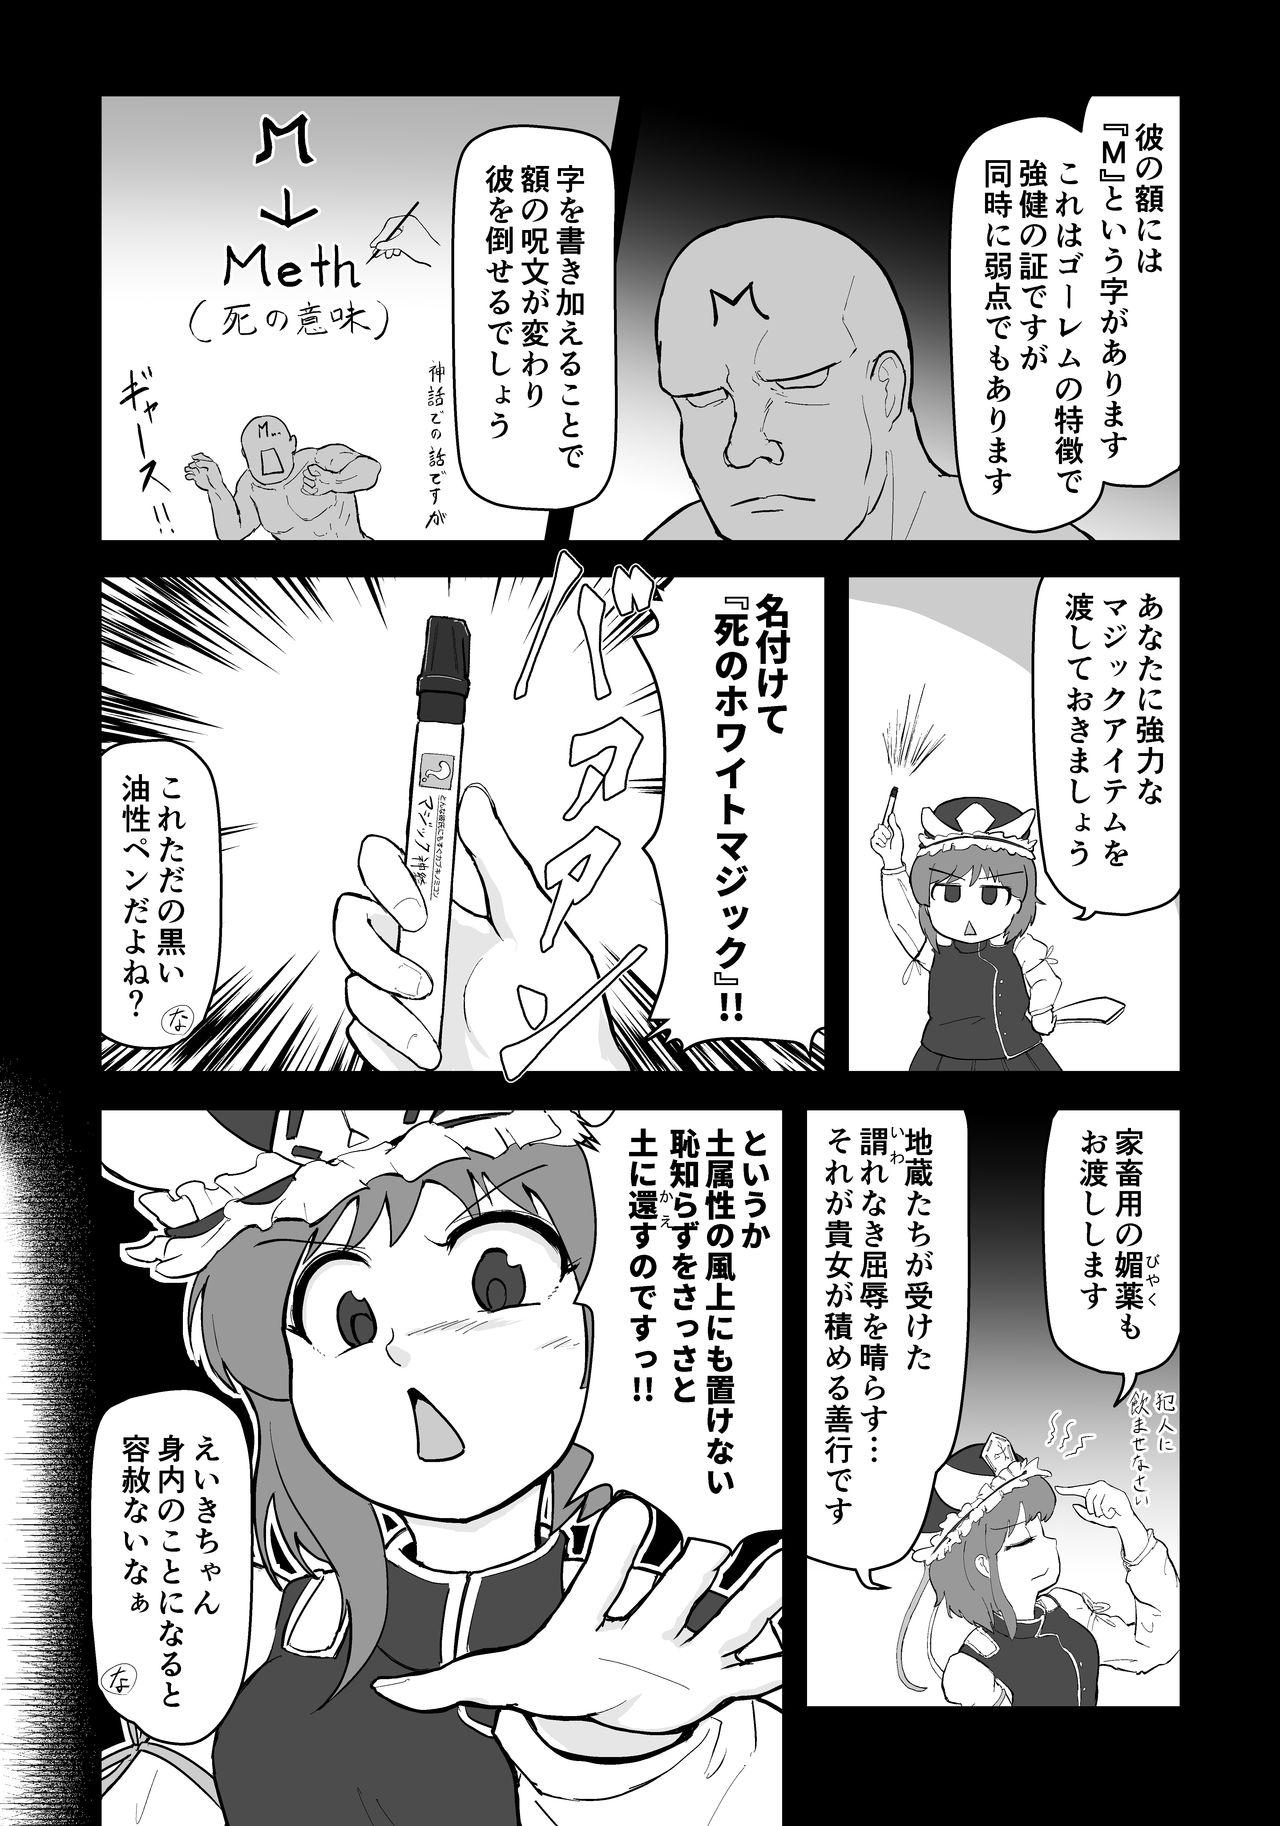 Morena I will mash you ! - Touhou project Hot Teen - Page 4